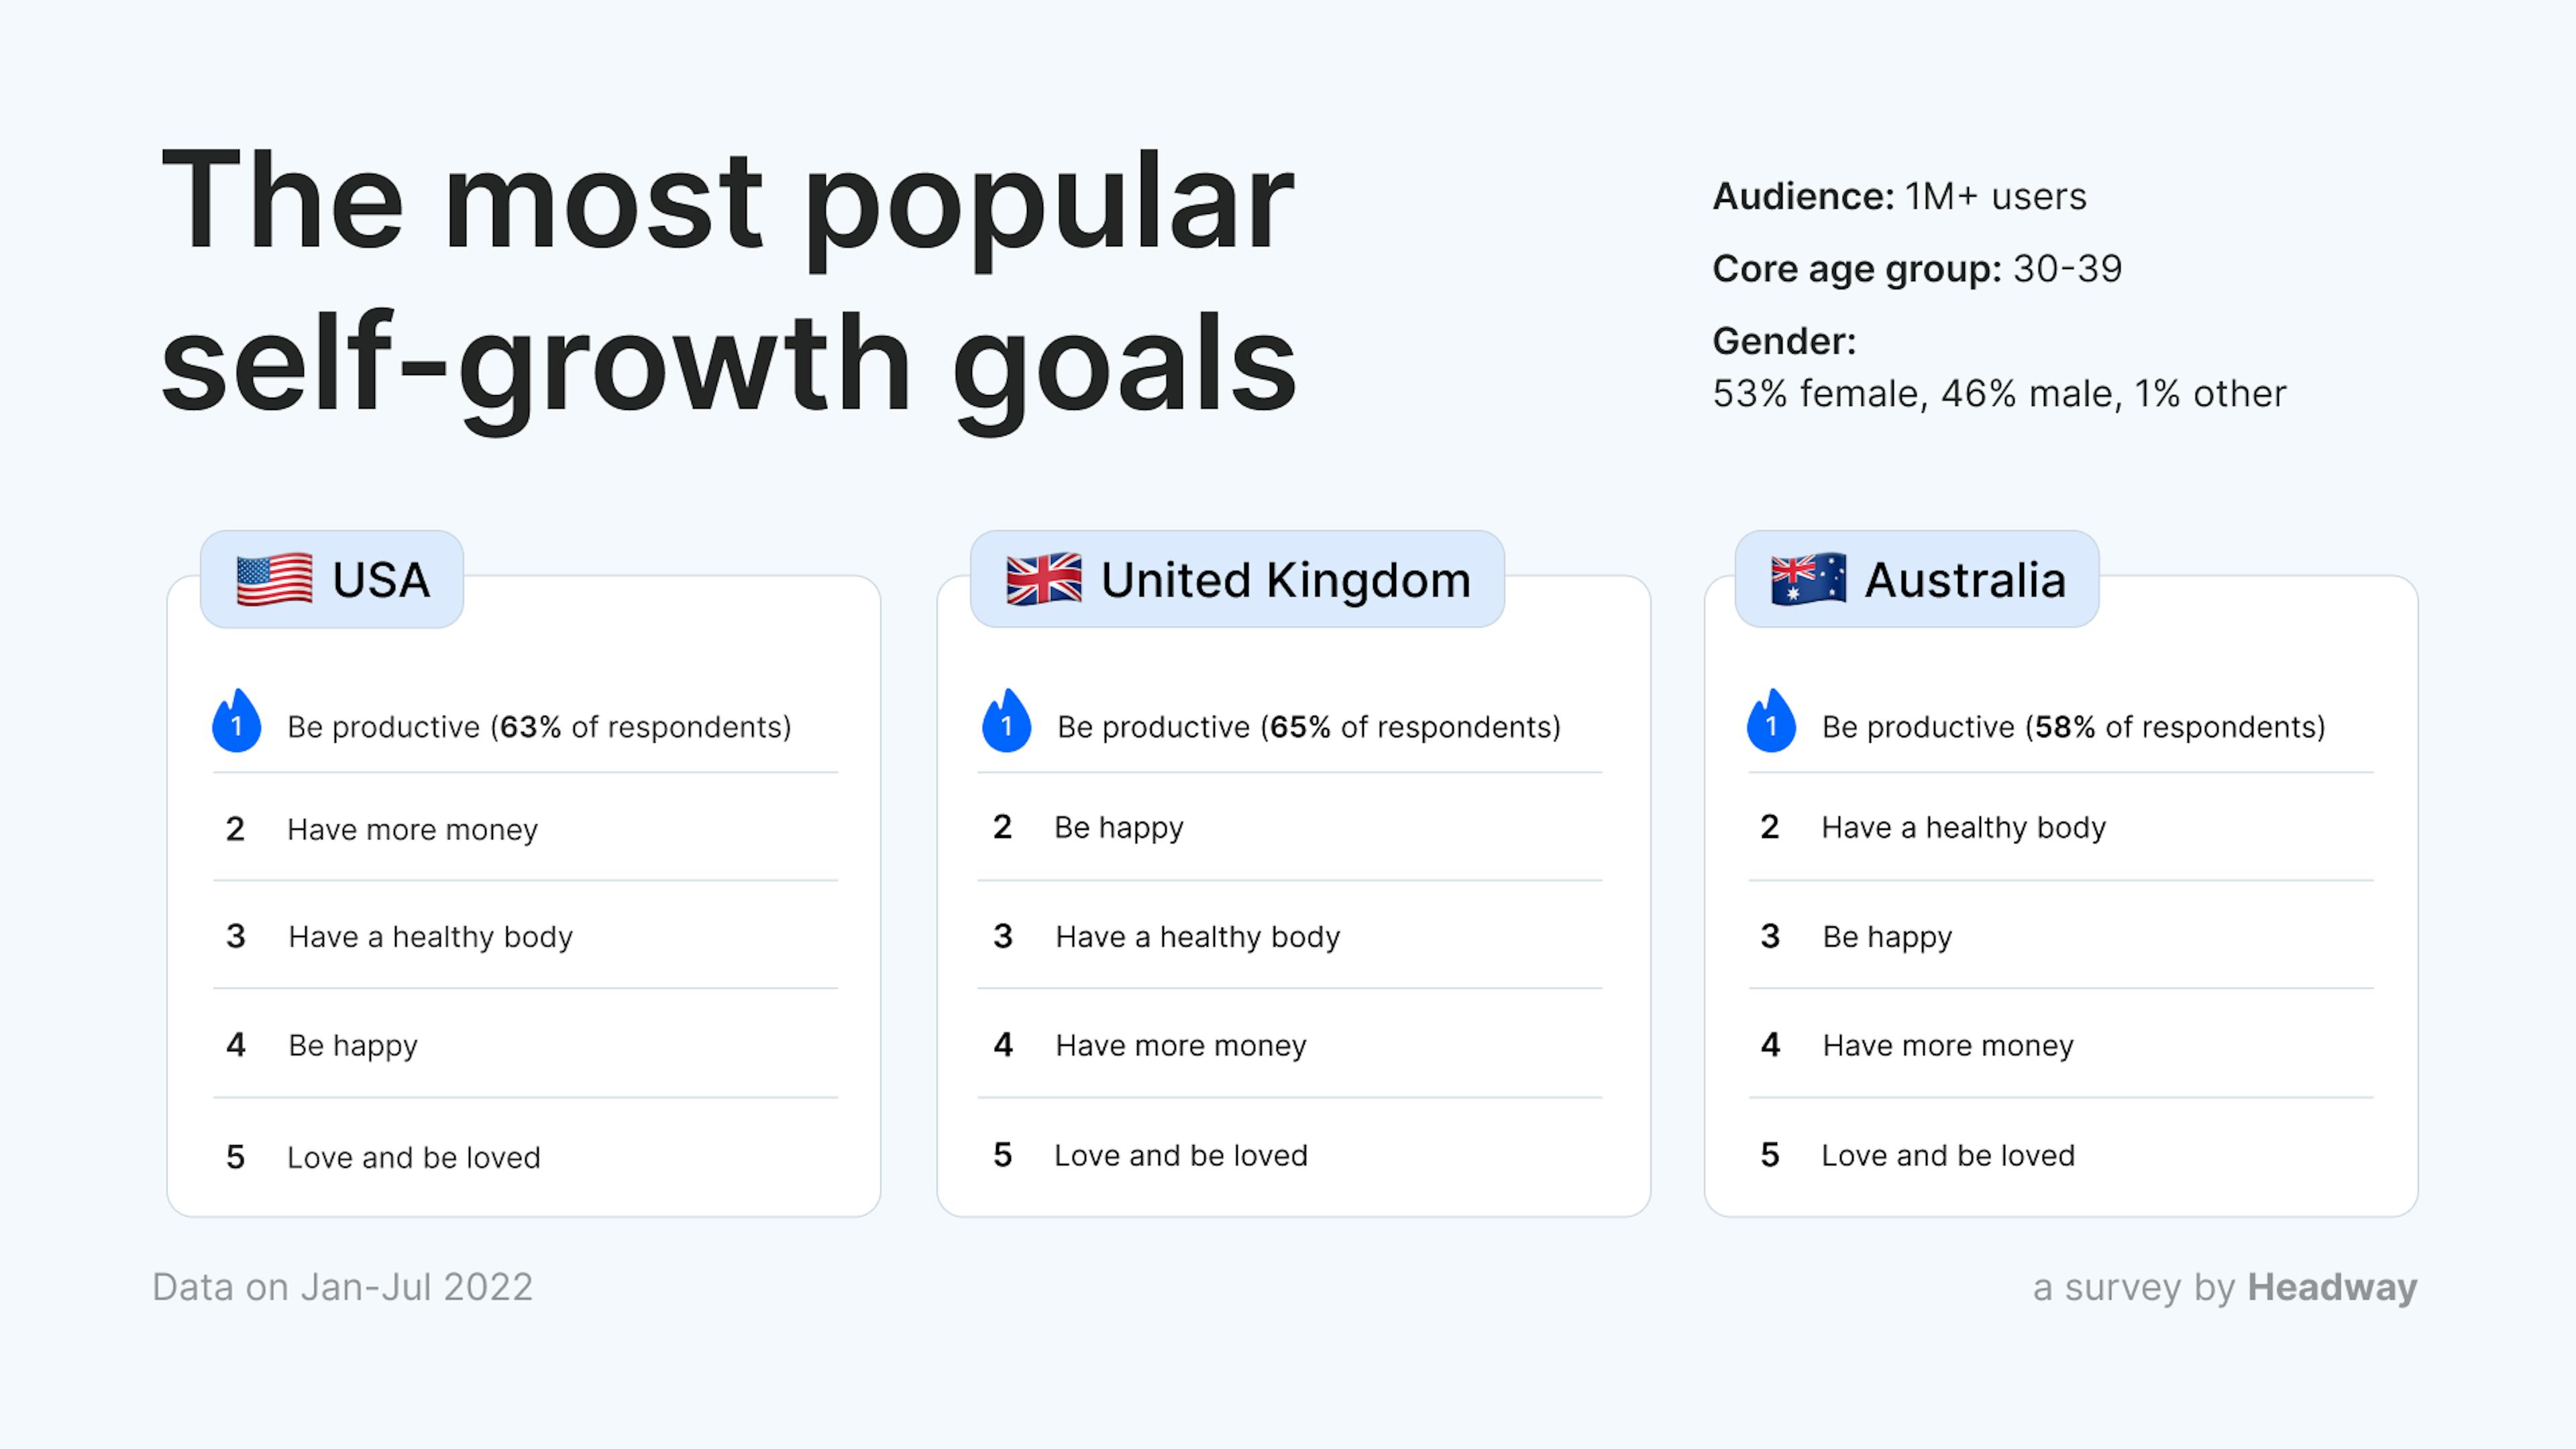 The most popular self-growth goals in 2022